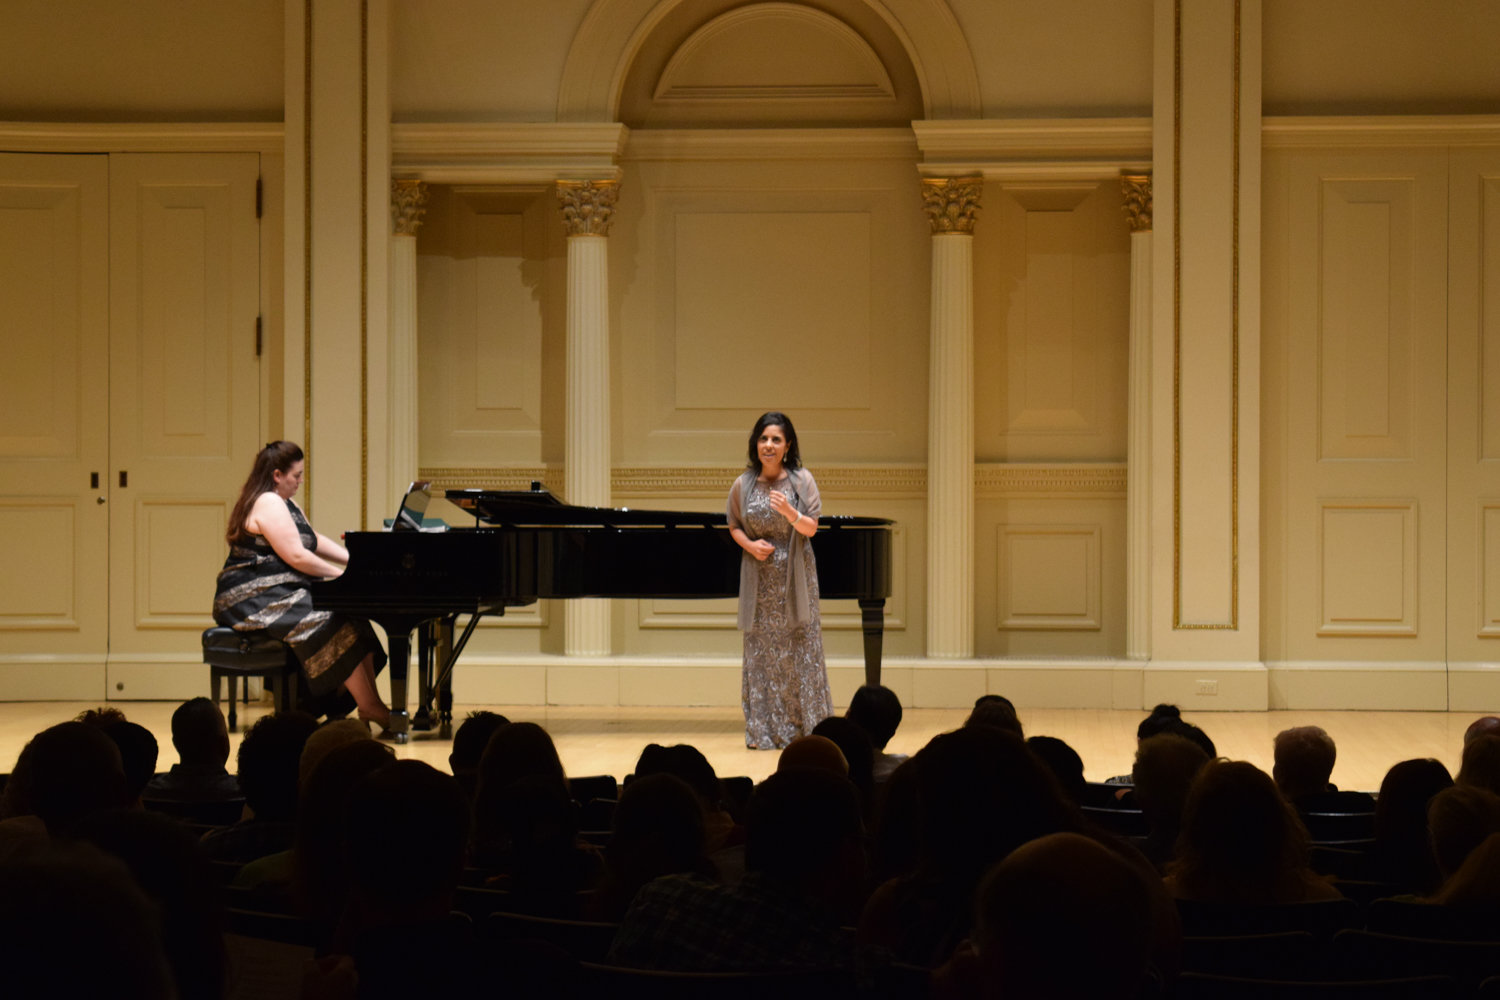 Soprano Sigal Chen graces the stage of Carnegie Hall for a performance of Mozart’s ‘Queen of the Night’ aria in 2017. While she can no longer perform for a live audience, the Riverdale singer and teacher has searched for different ways to keep active during the coronavirus pandemic, such as teaching over videoconferencing applications online.